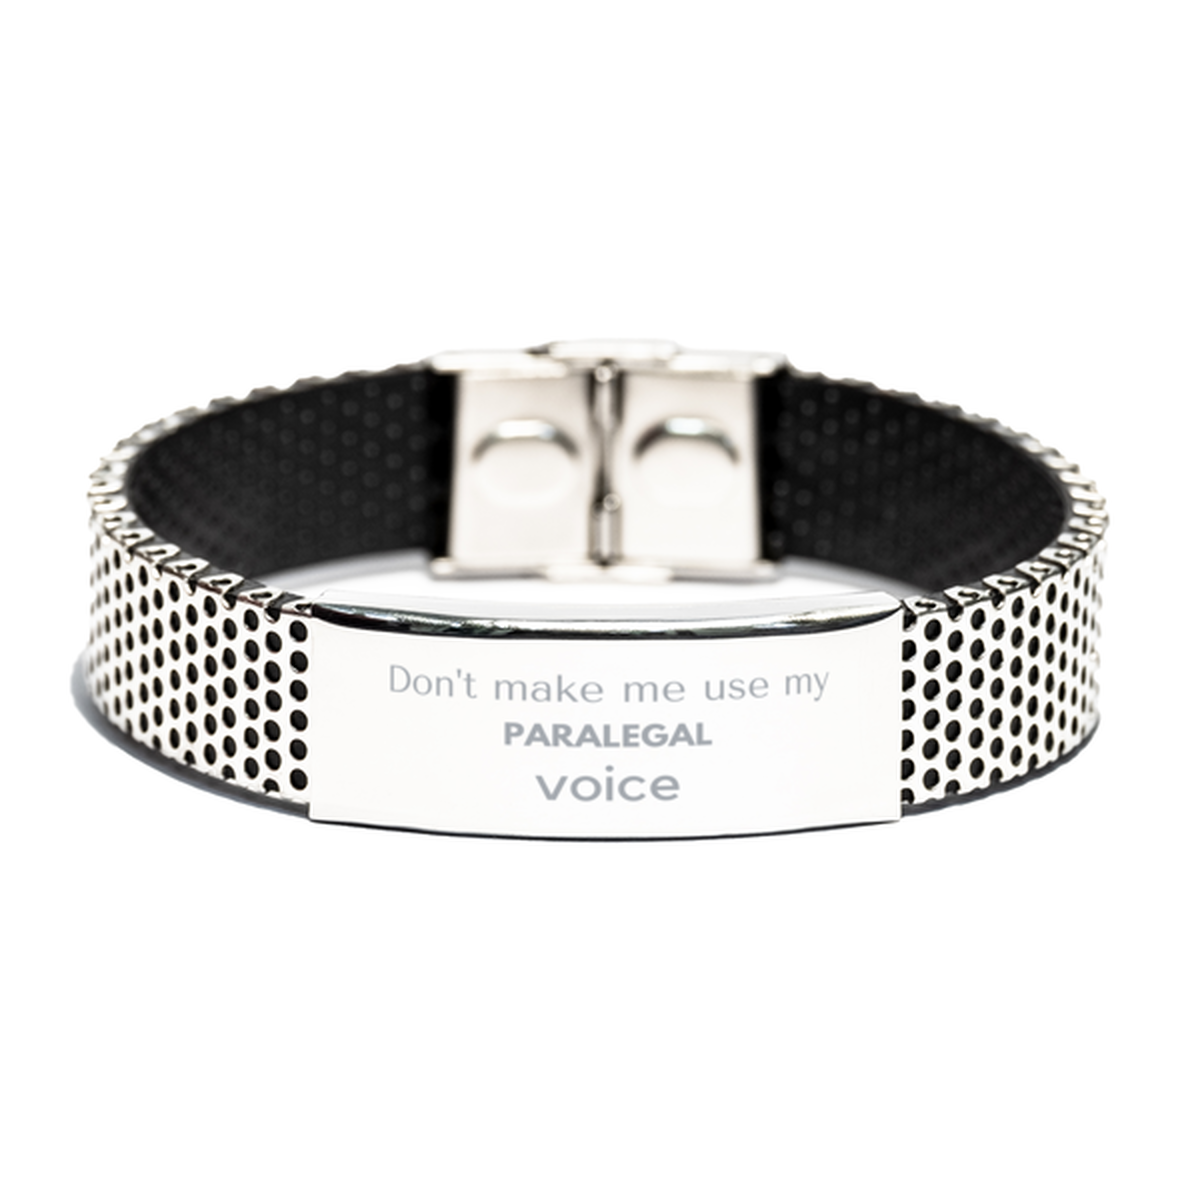 Don't make me use my Paralegal voice, Sarcasm Paralegal Gifts, Christmas Paralegal Stainless Steel Bracelet Birthday Unique Gifts For Paralegal Coworkers, Men, Women, Colleague, Friends